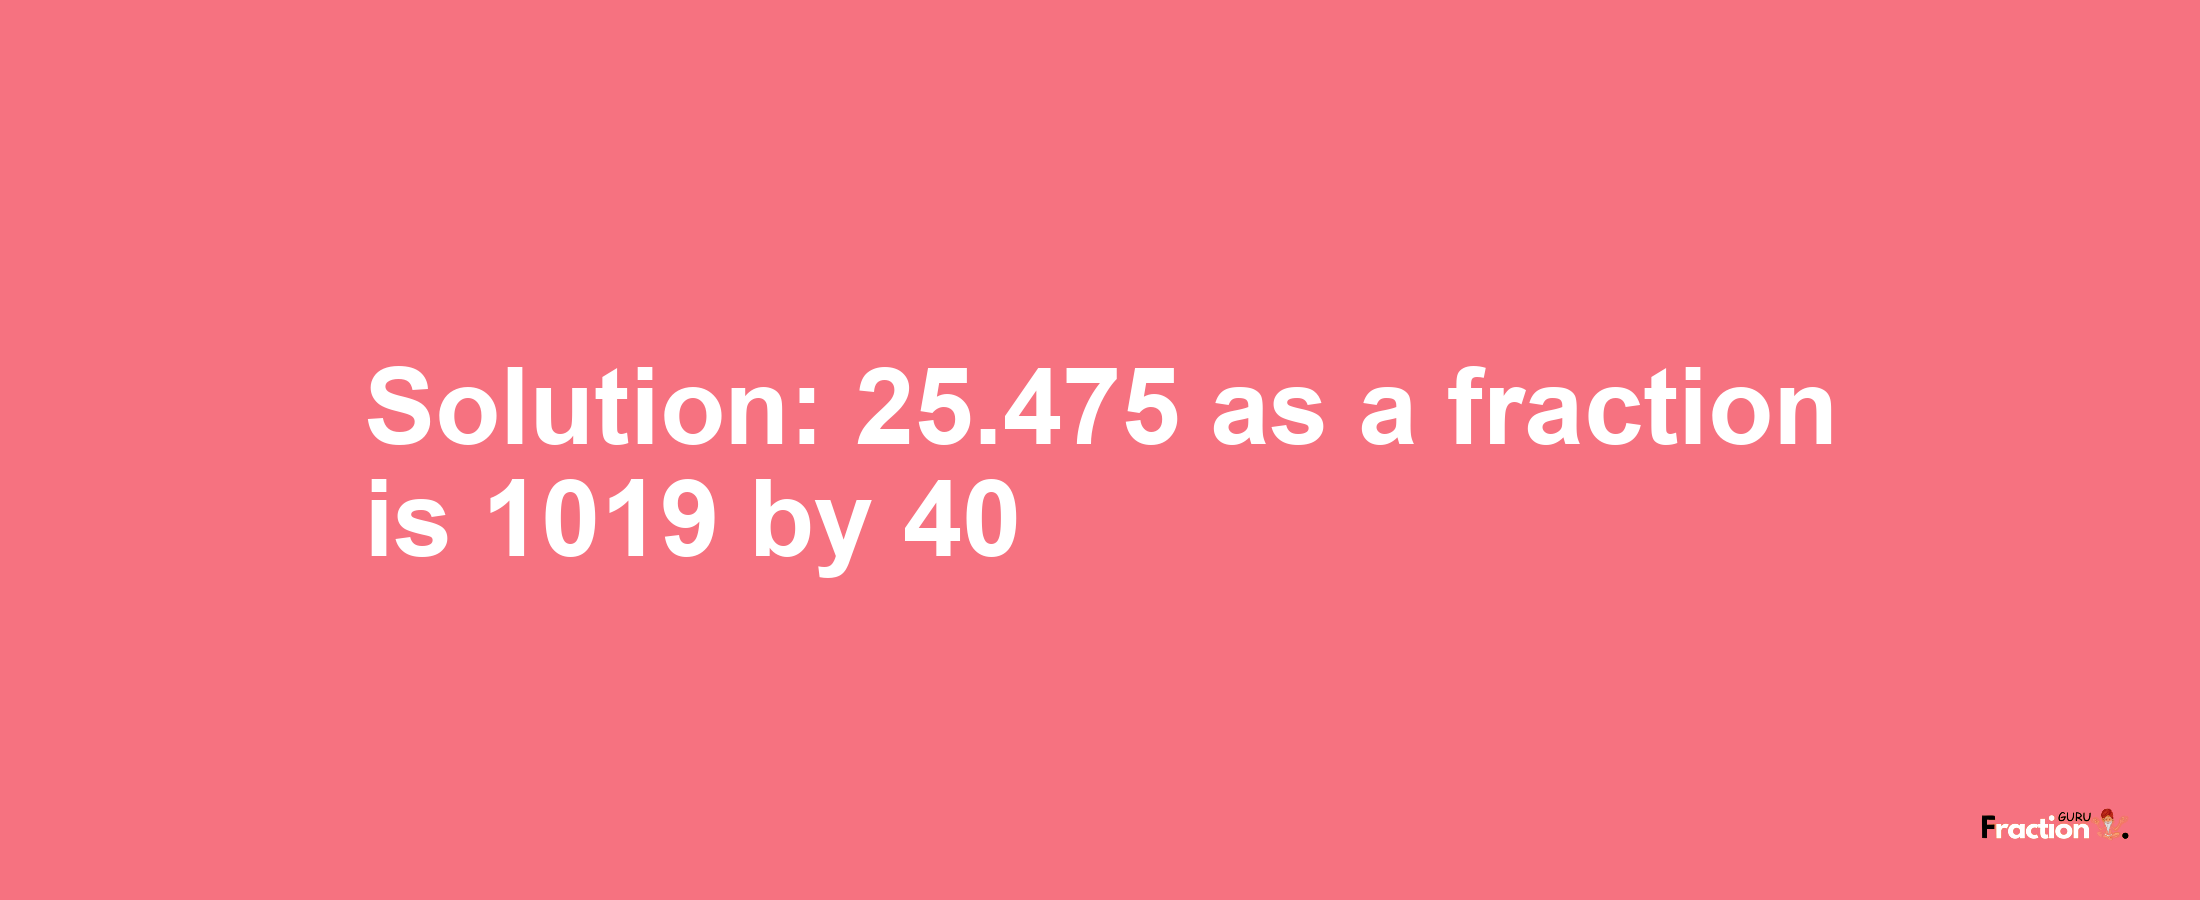 Solution:25.475 as a fraction is 1019/40